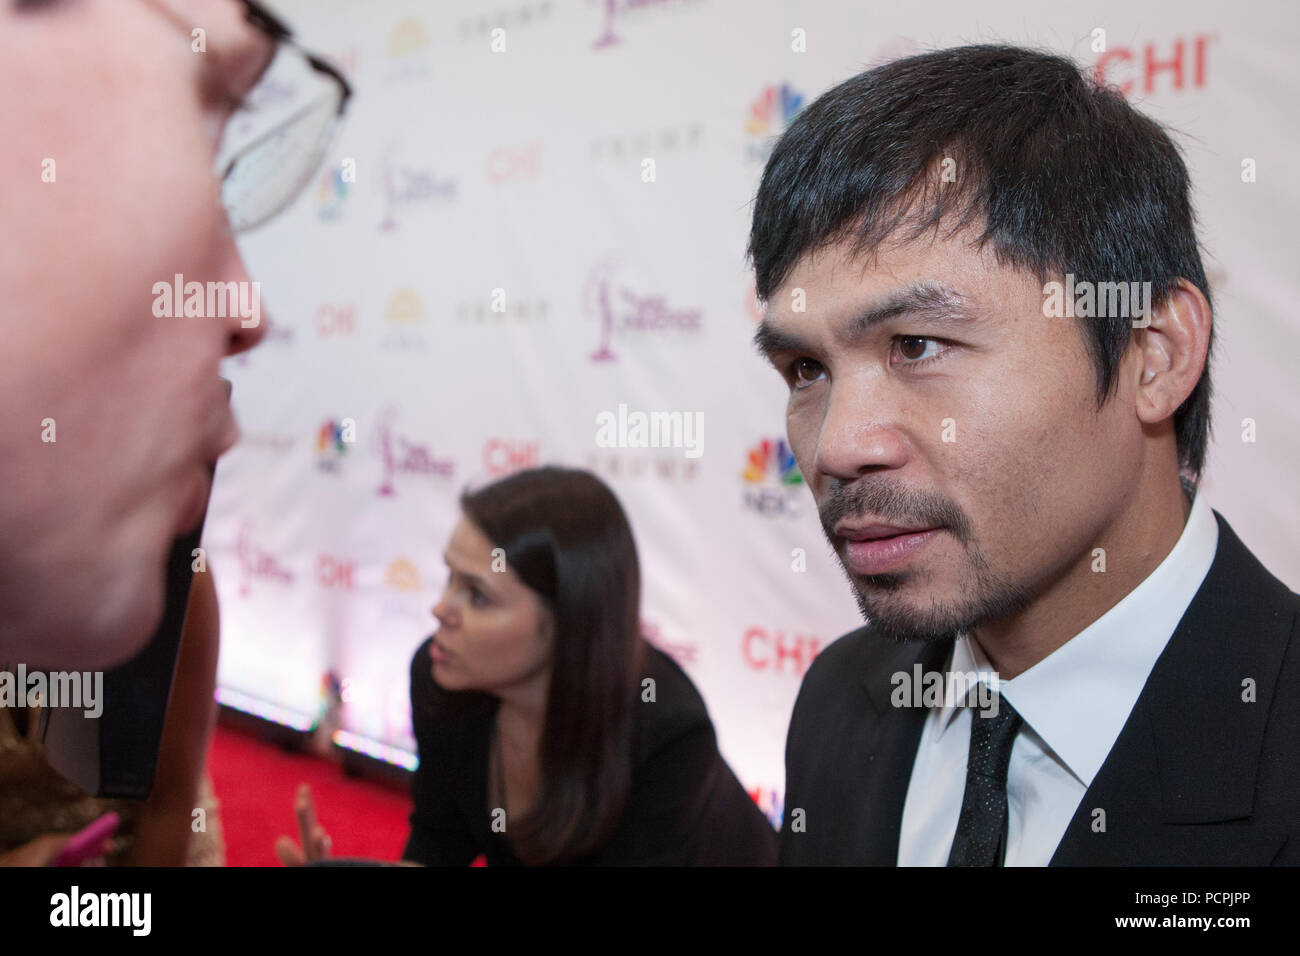 DORAL, FL - JANUARY 25: Manny Pacquiao attends The 63rd Annual Miss Universe Pageant Red Carpet at Trump National Doral on January 25, 2015 in Doral, Florida  People:  Manny Pacquiao Stock Photo